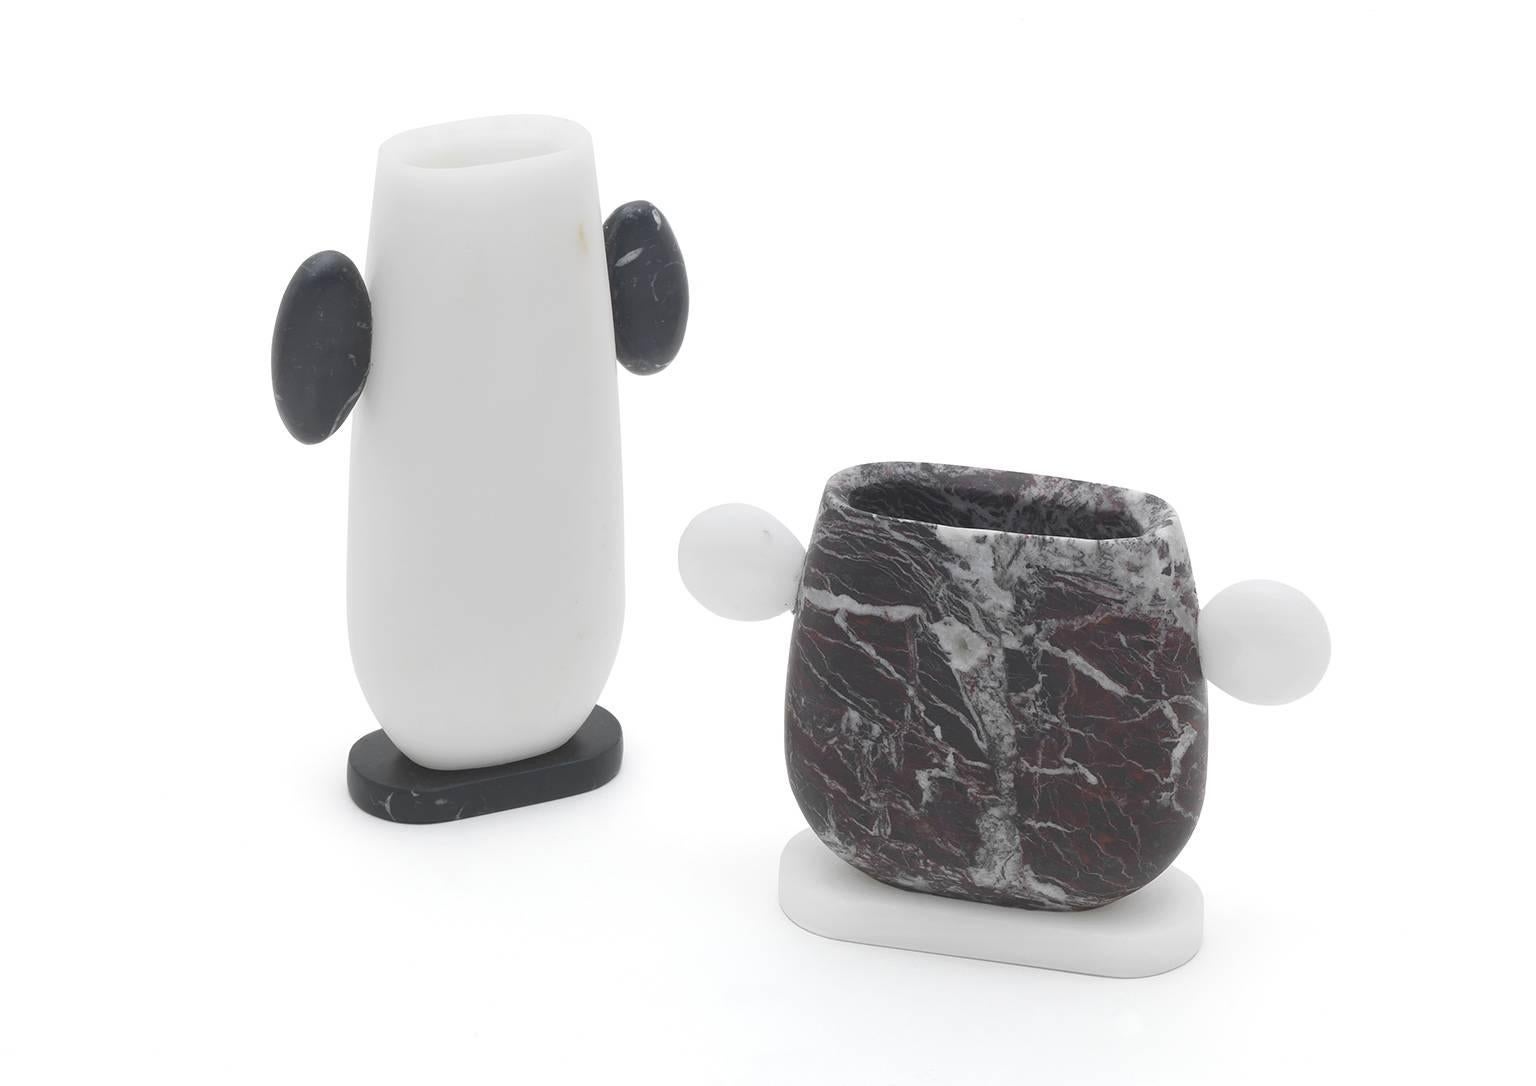 Pen or toothbrush holder, vase in White Michelangelo and Black Marquinia Marble.
Size: 11.7 x 4 x 17 cm, smooth finishing. Commercial name: Nardo, Homage Collection by the Italian designer Matteo Cibic. Made in Italy, hand finished.
This is not a